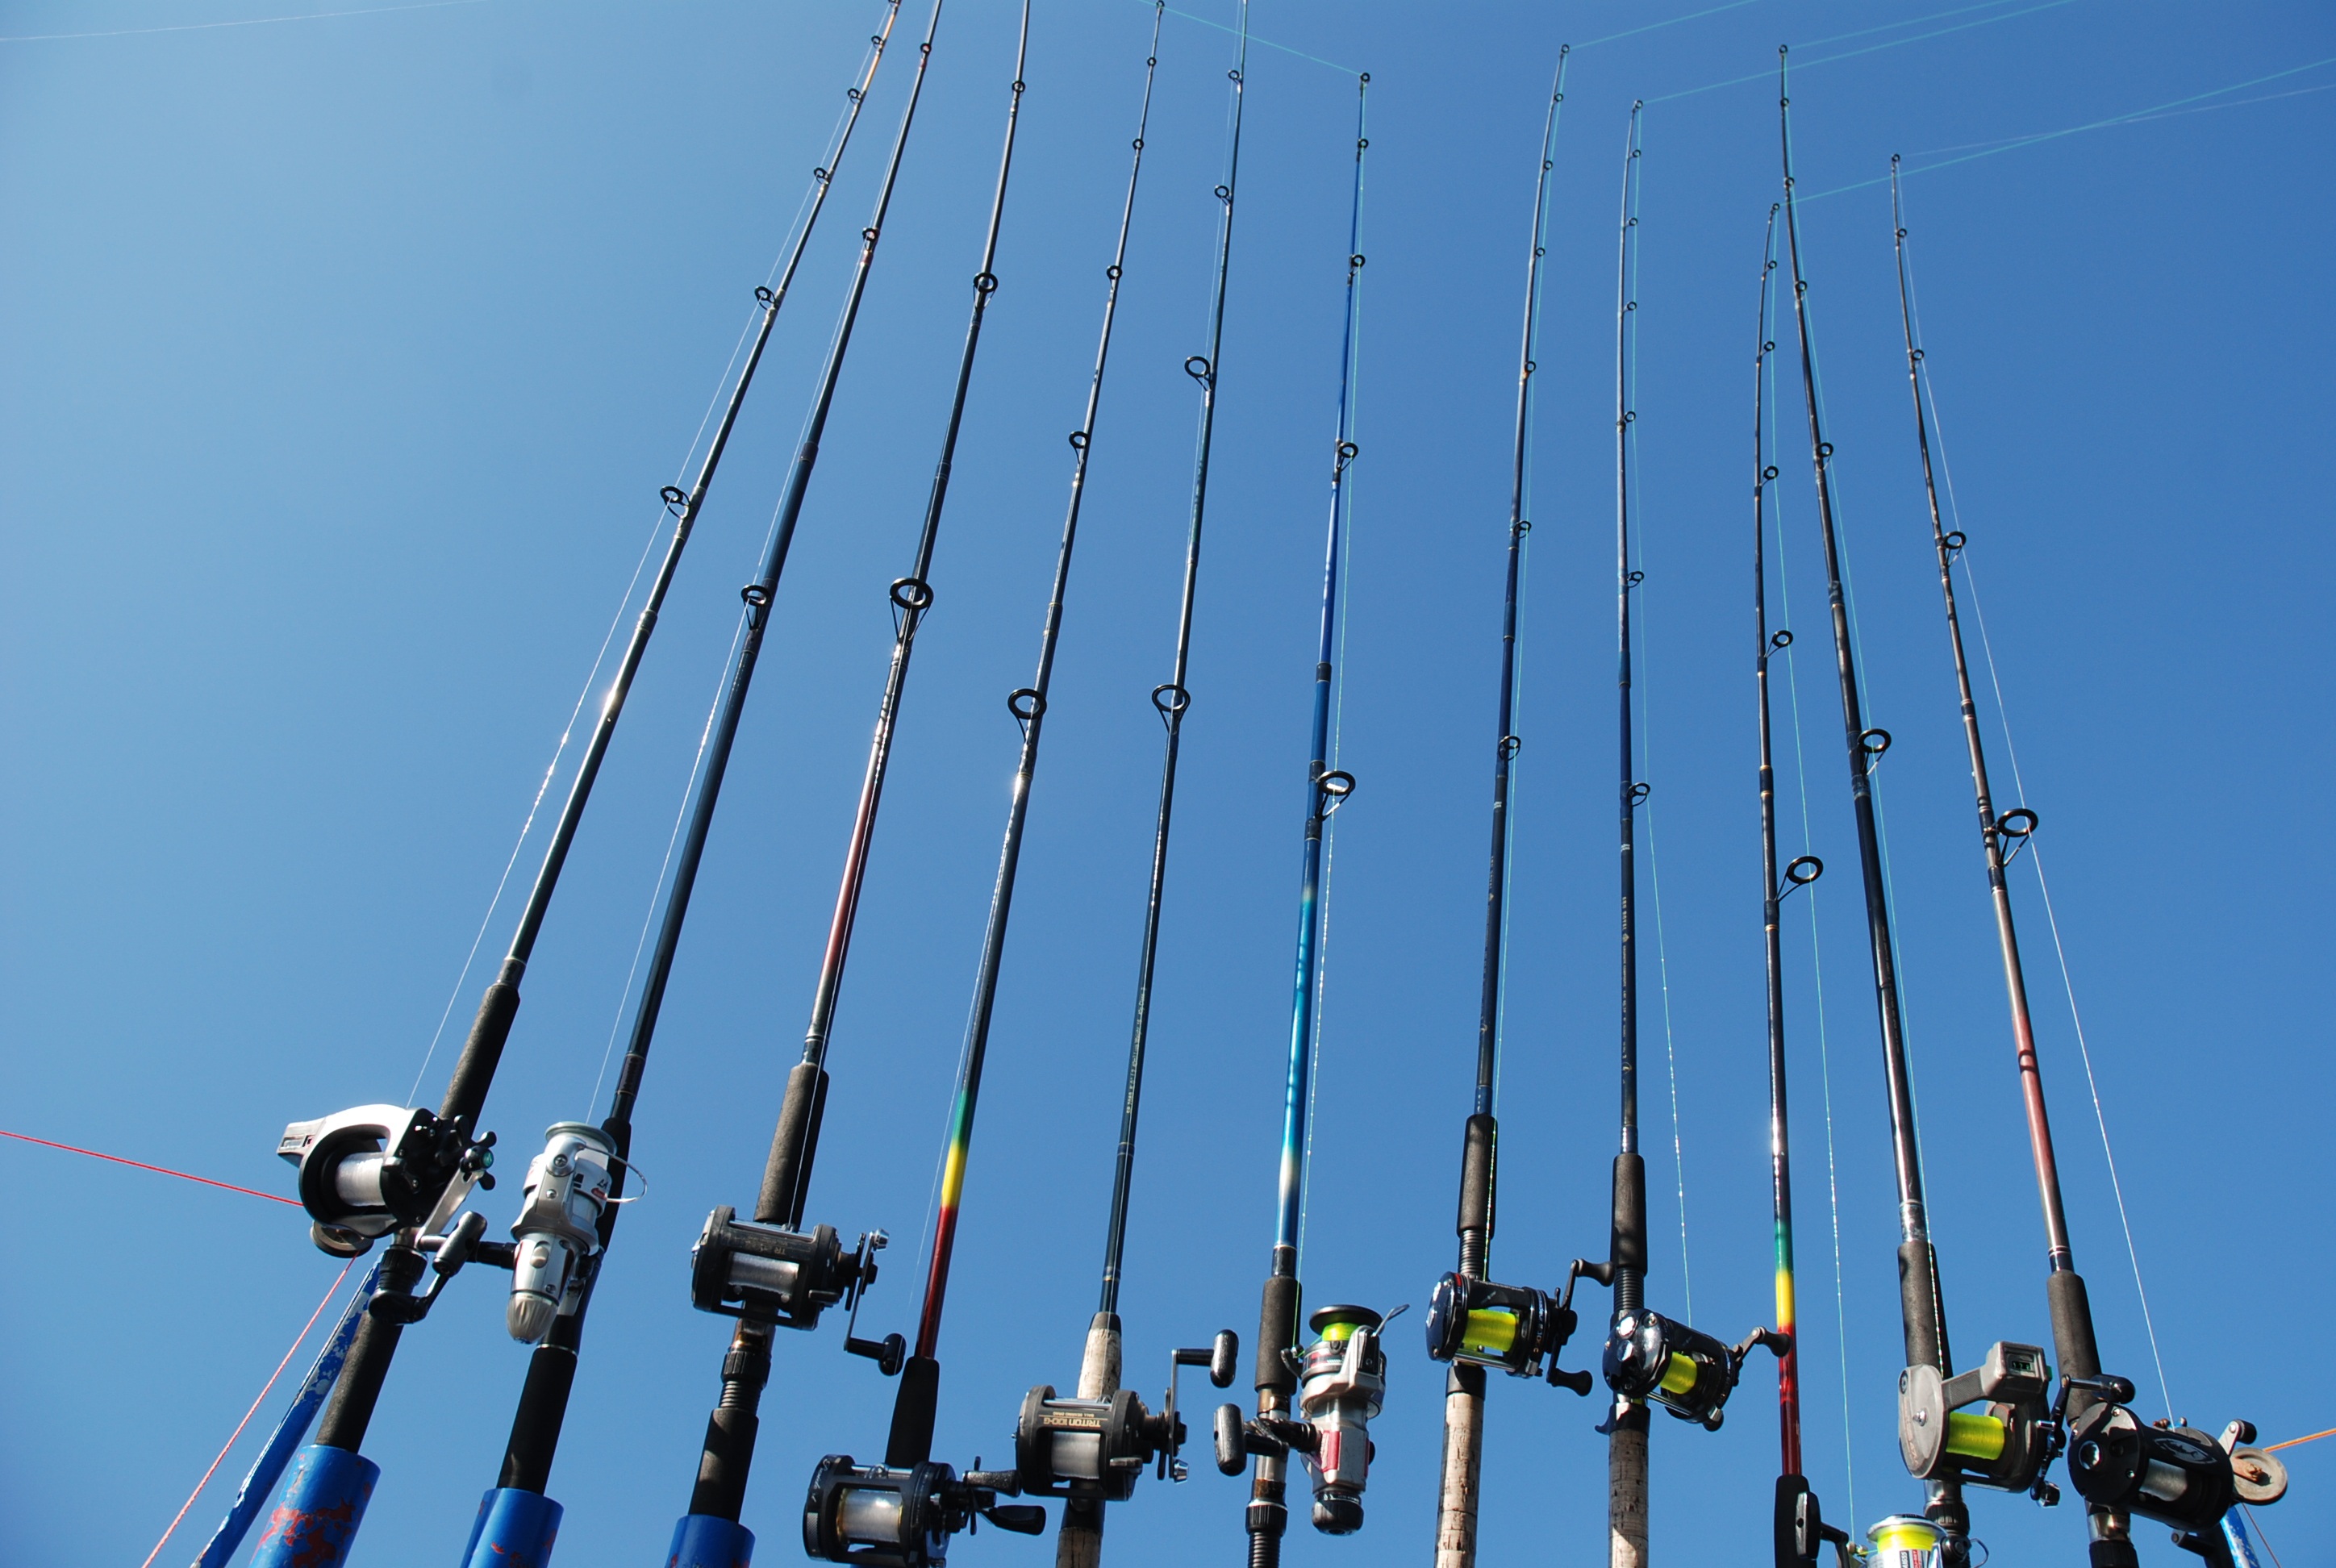 A row of fishing rods and reels HD Wallpaper